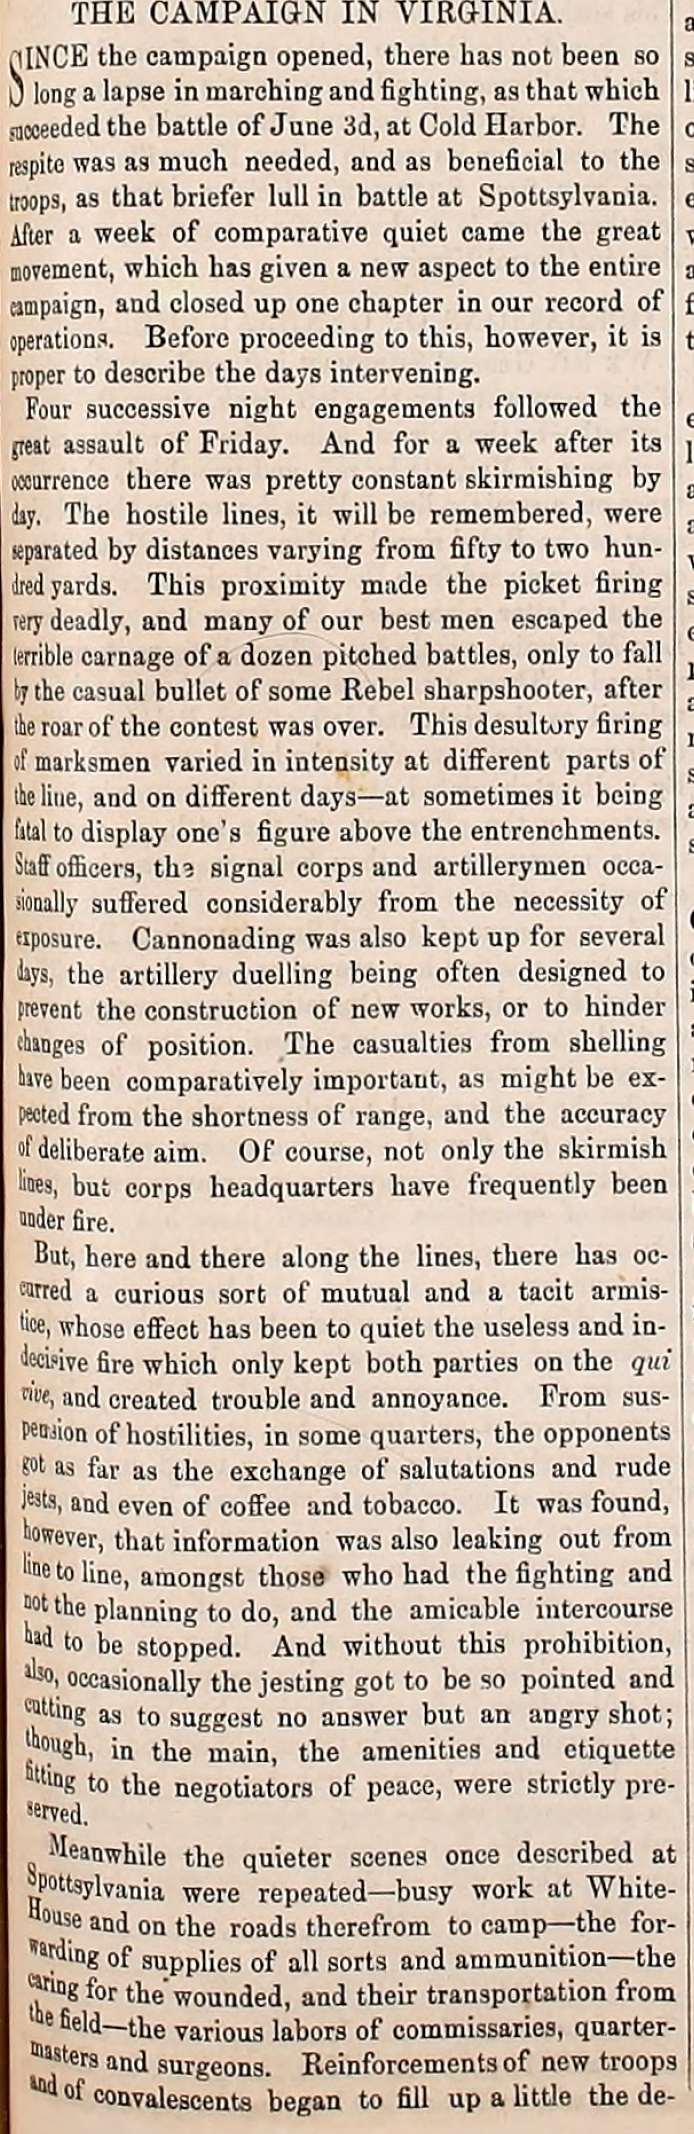 Army Navy Journal article on the progress of the Virginia Campaign